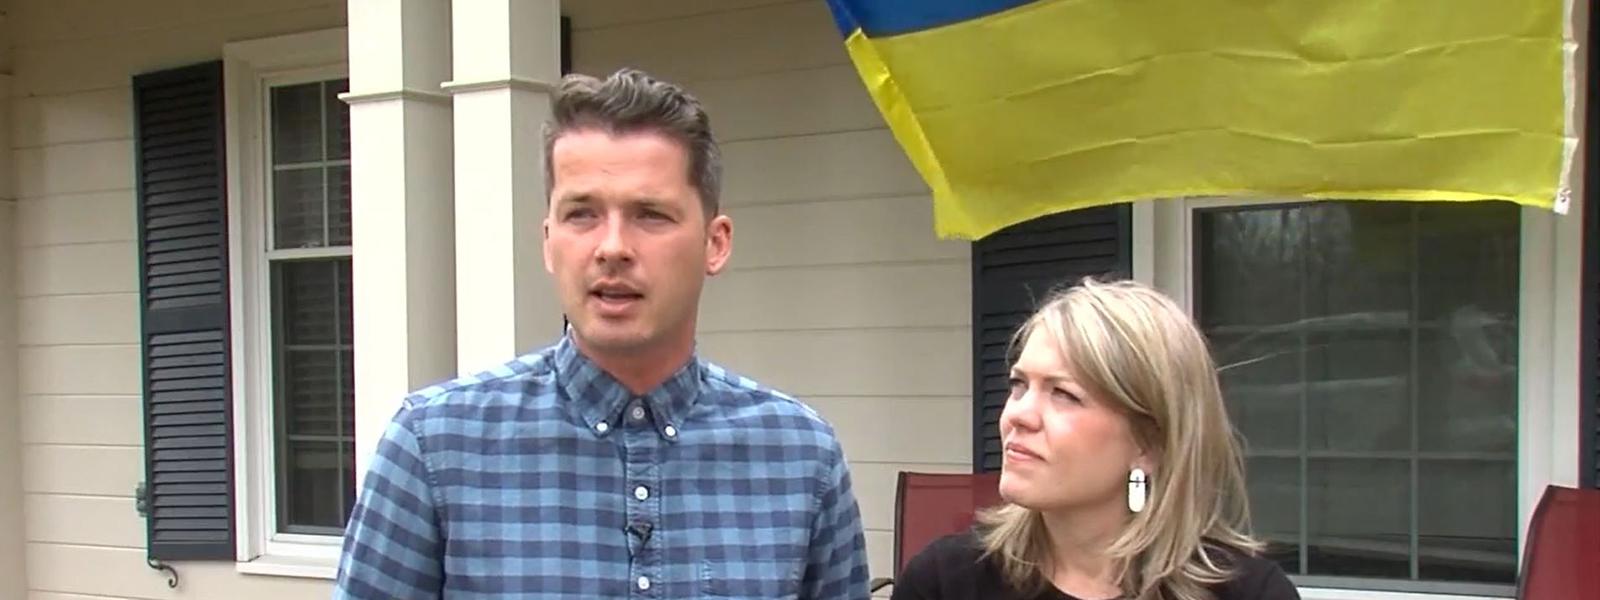 With a Ukrainian flag flying in the background, Pastor Andrew Moroz and his wife Samantha talk to ABC 13 WSET in Lynchburg, Virginia.